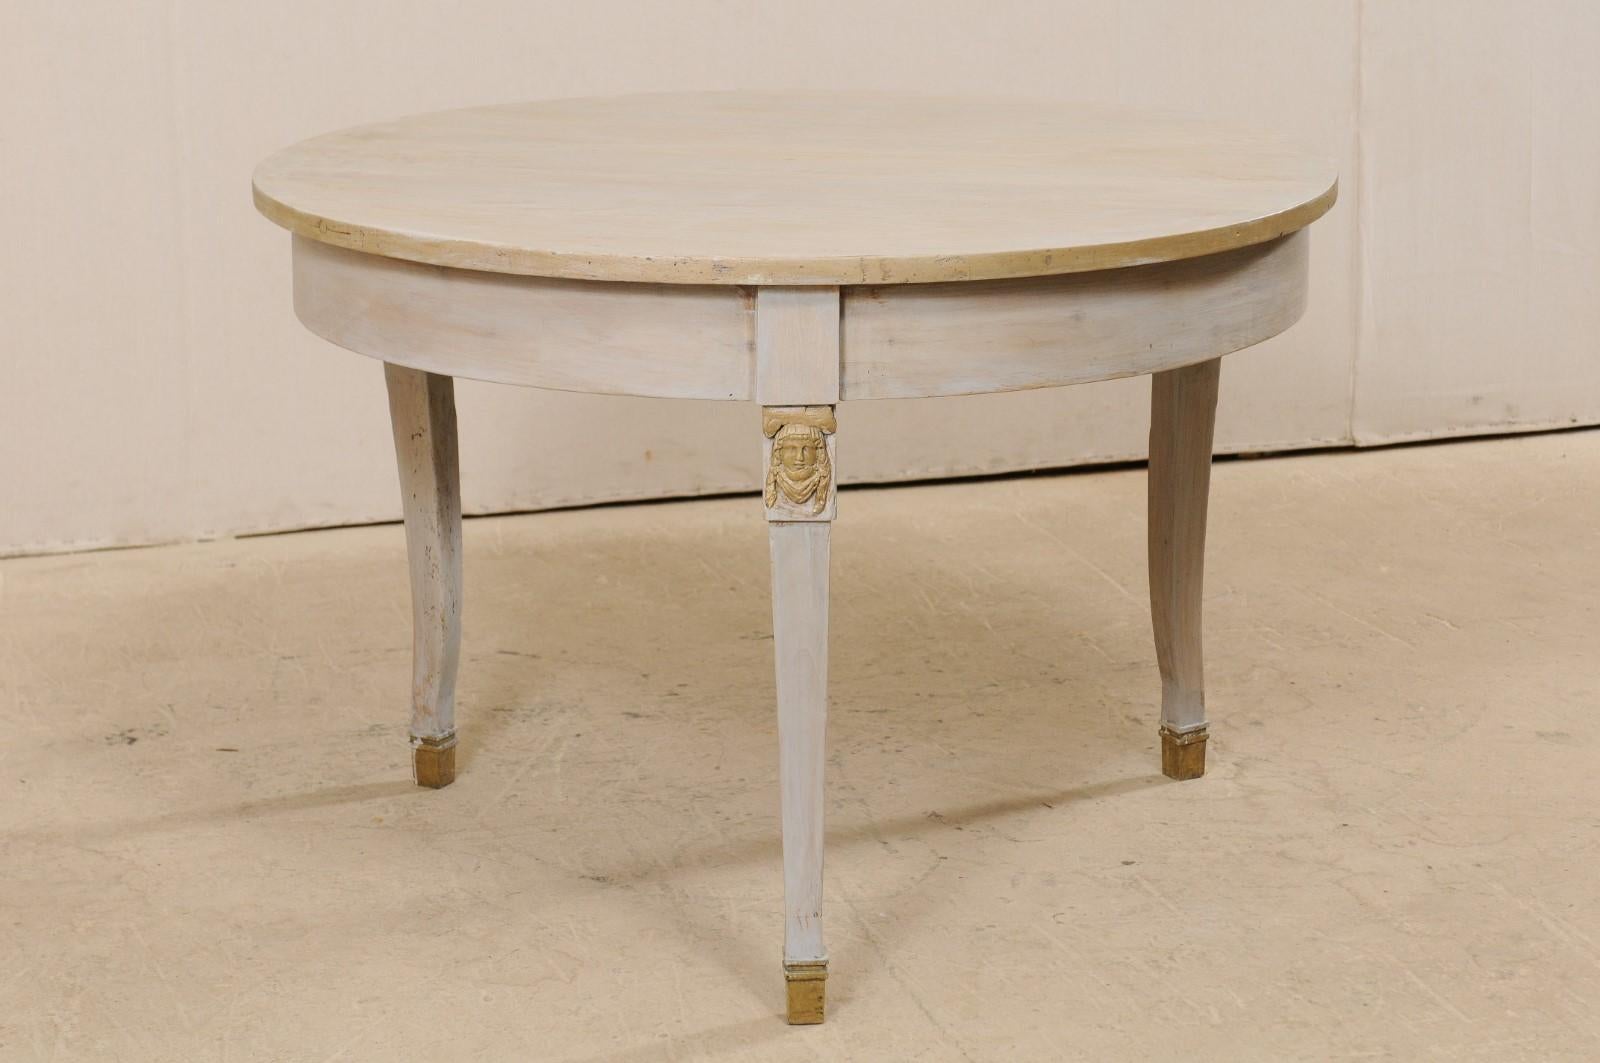 20th Century French 1920s Painted Wood Occasional or Center Table